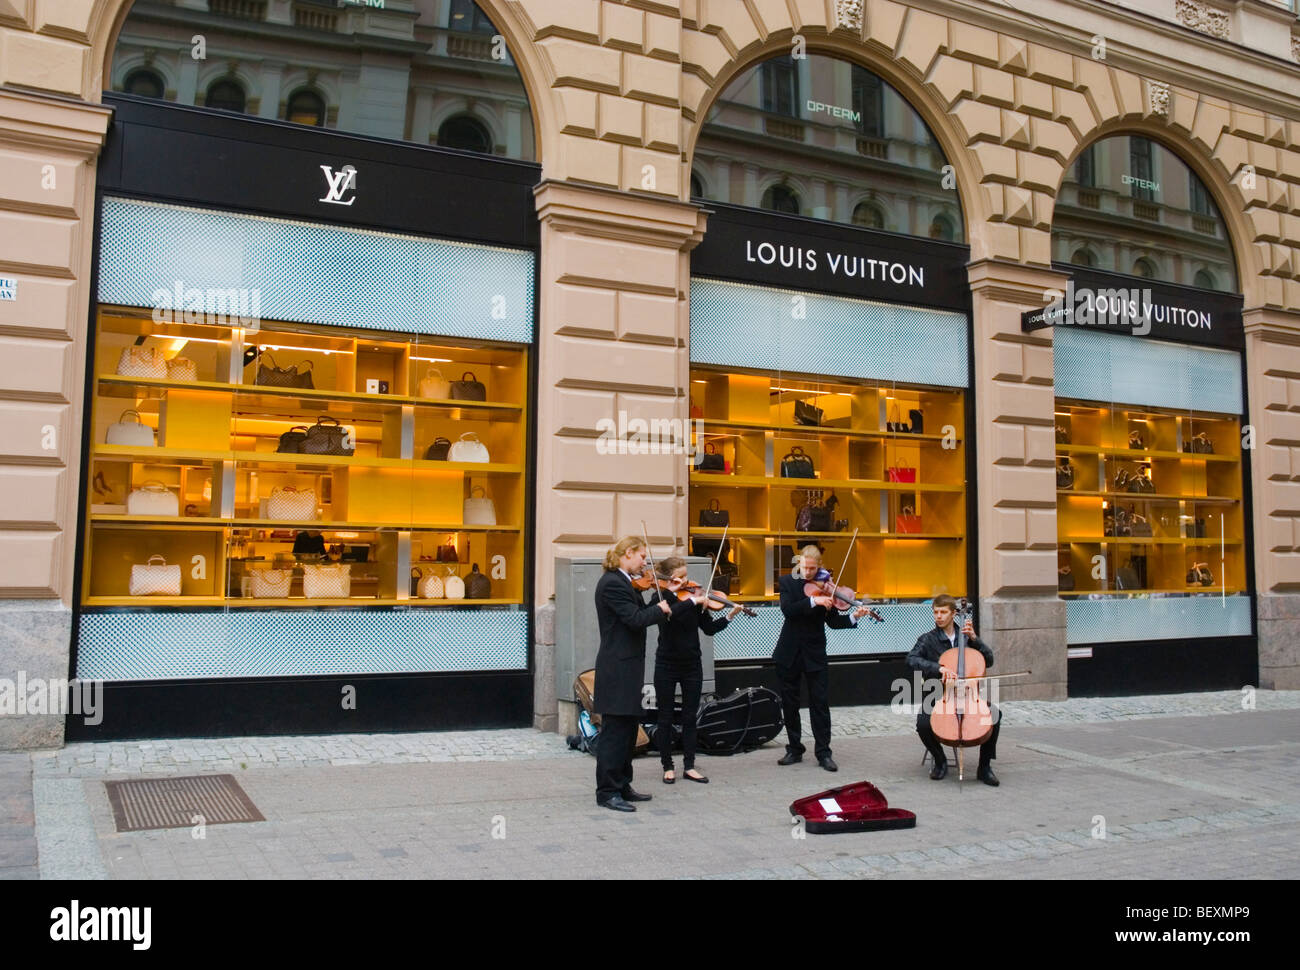 Classical music buskers in front of Louis Vuitton store in central Helsinki Finland Europe Stock Photo